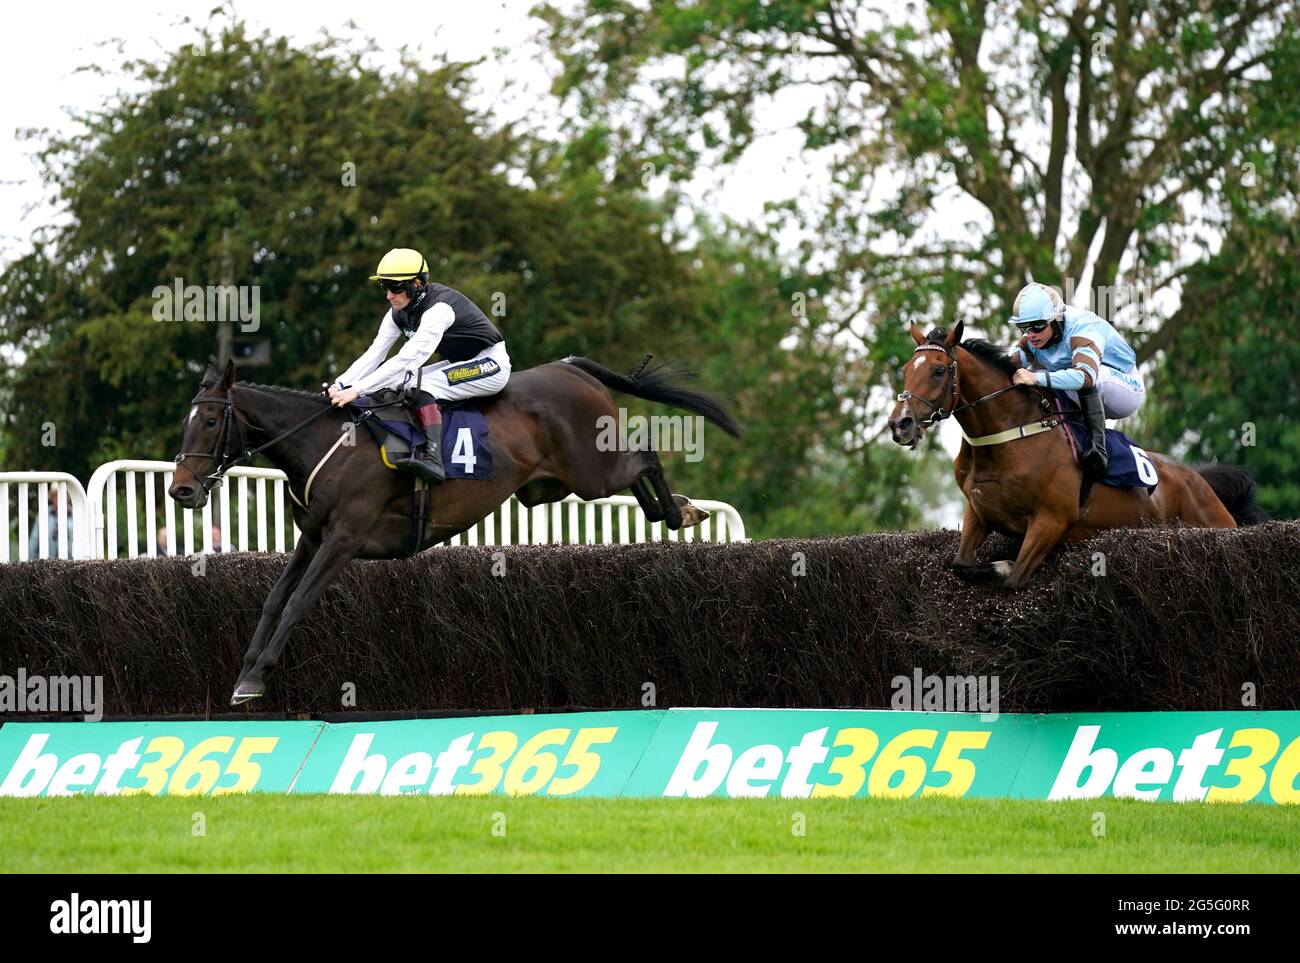 Goa Lil ridden by Sam Twiston-Davies (left) and Statuario ridden by James Bowen clear a hurdle whilst competing in the bet365 Handicap Chase at Uttoxeter Racecourse. Sunday June 27, 2021. Stock Photo